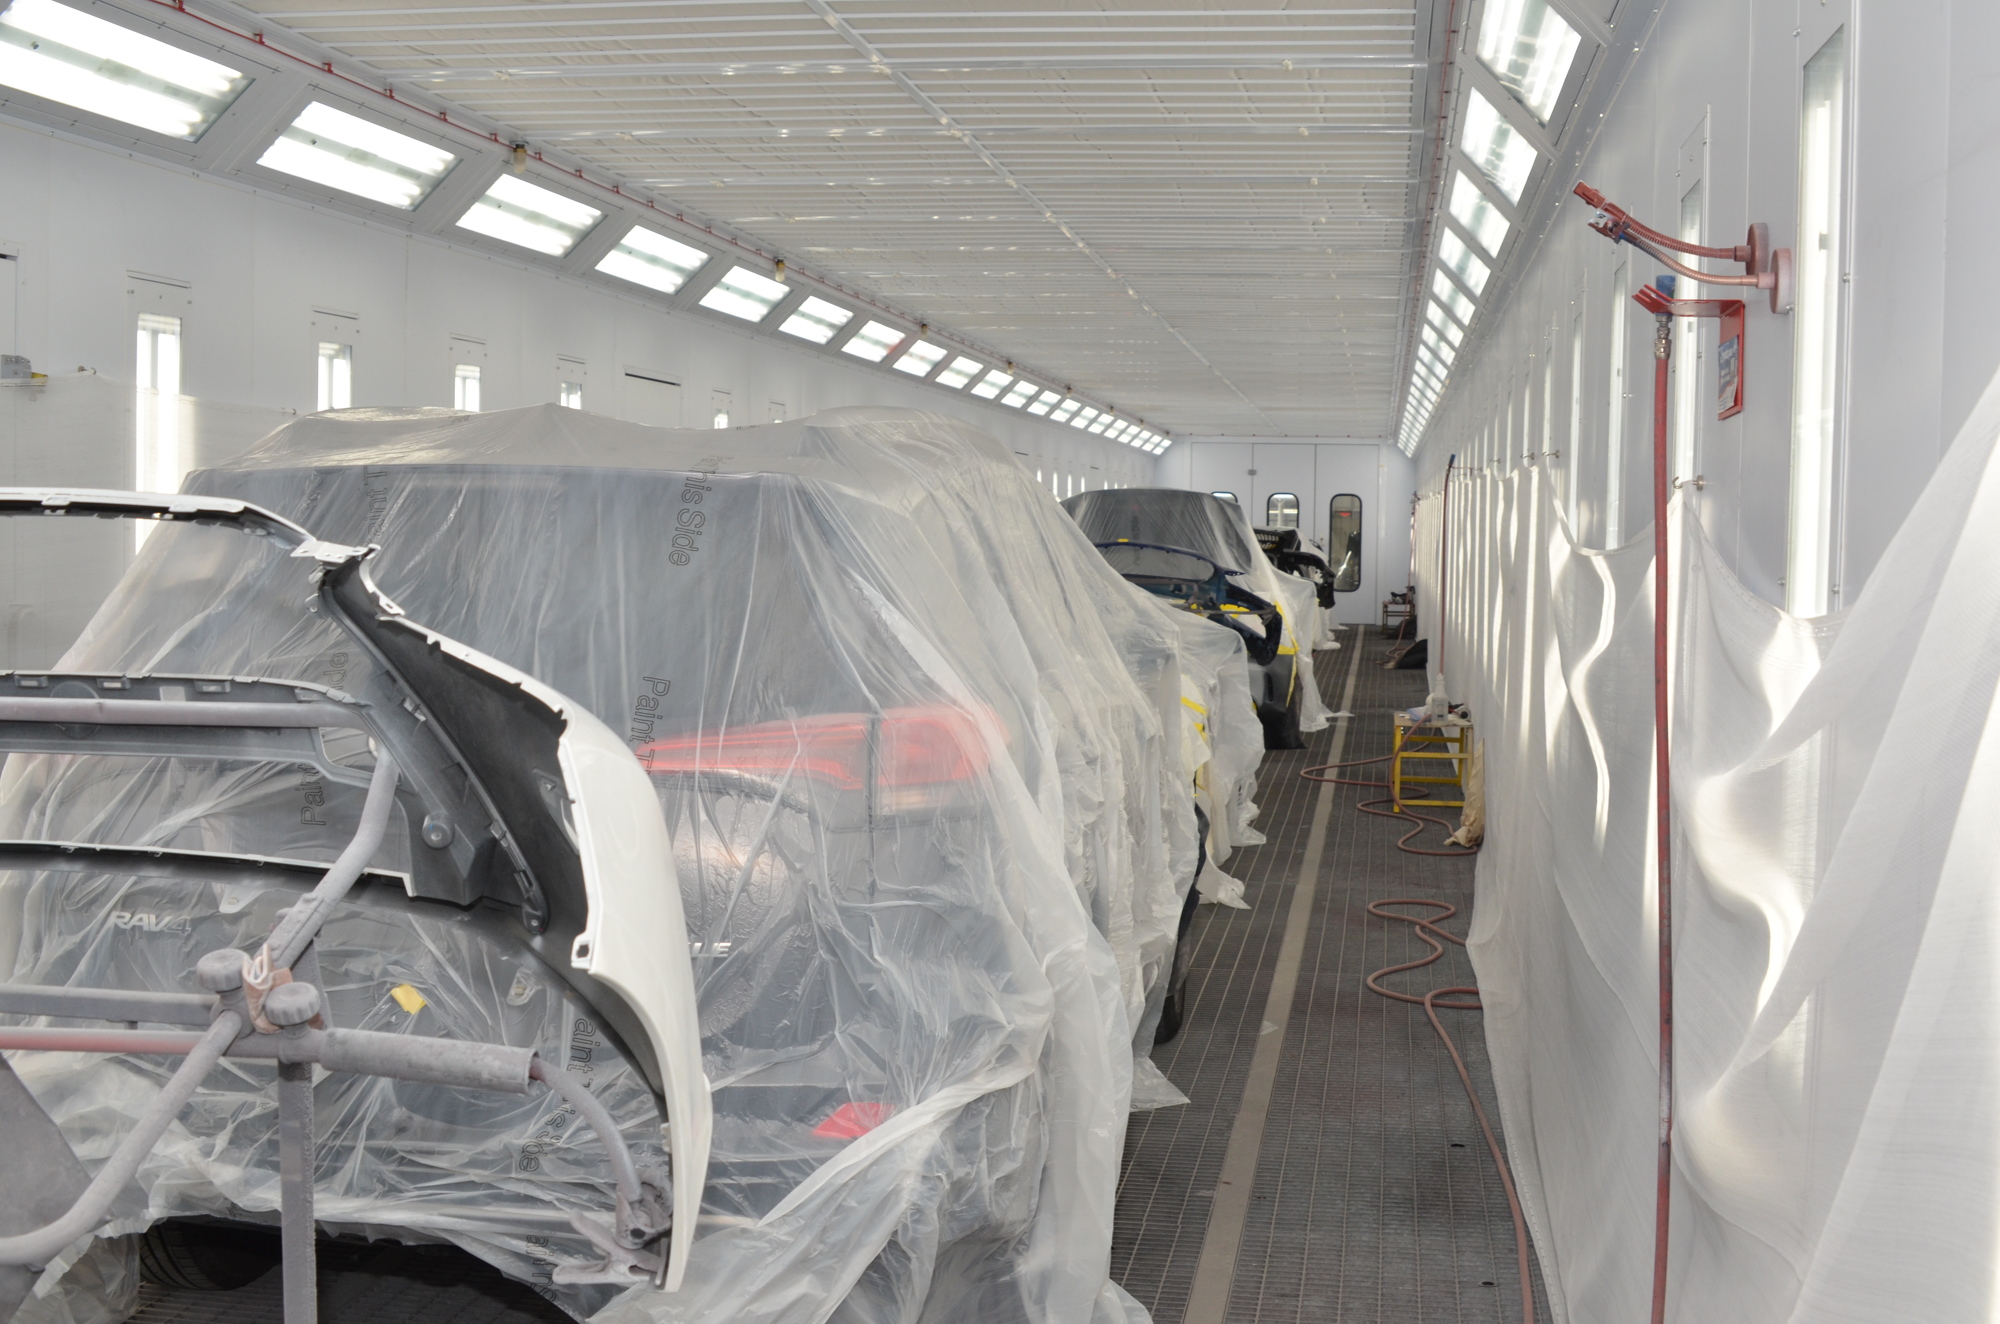 Two 140-foot-long paint booths can accommodate seven vehicles and paint seven different colors at one time.